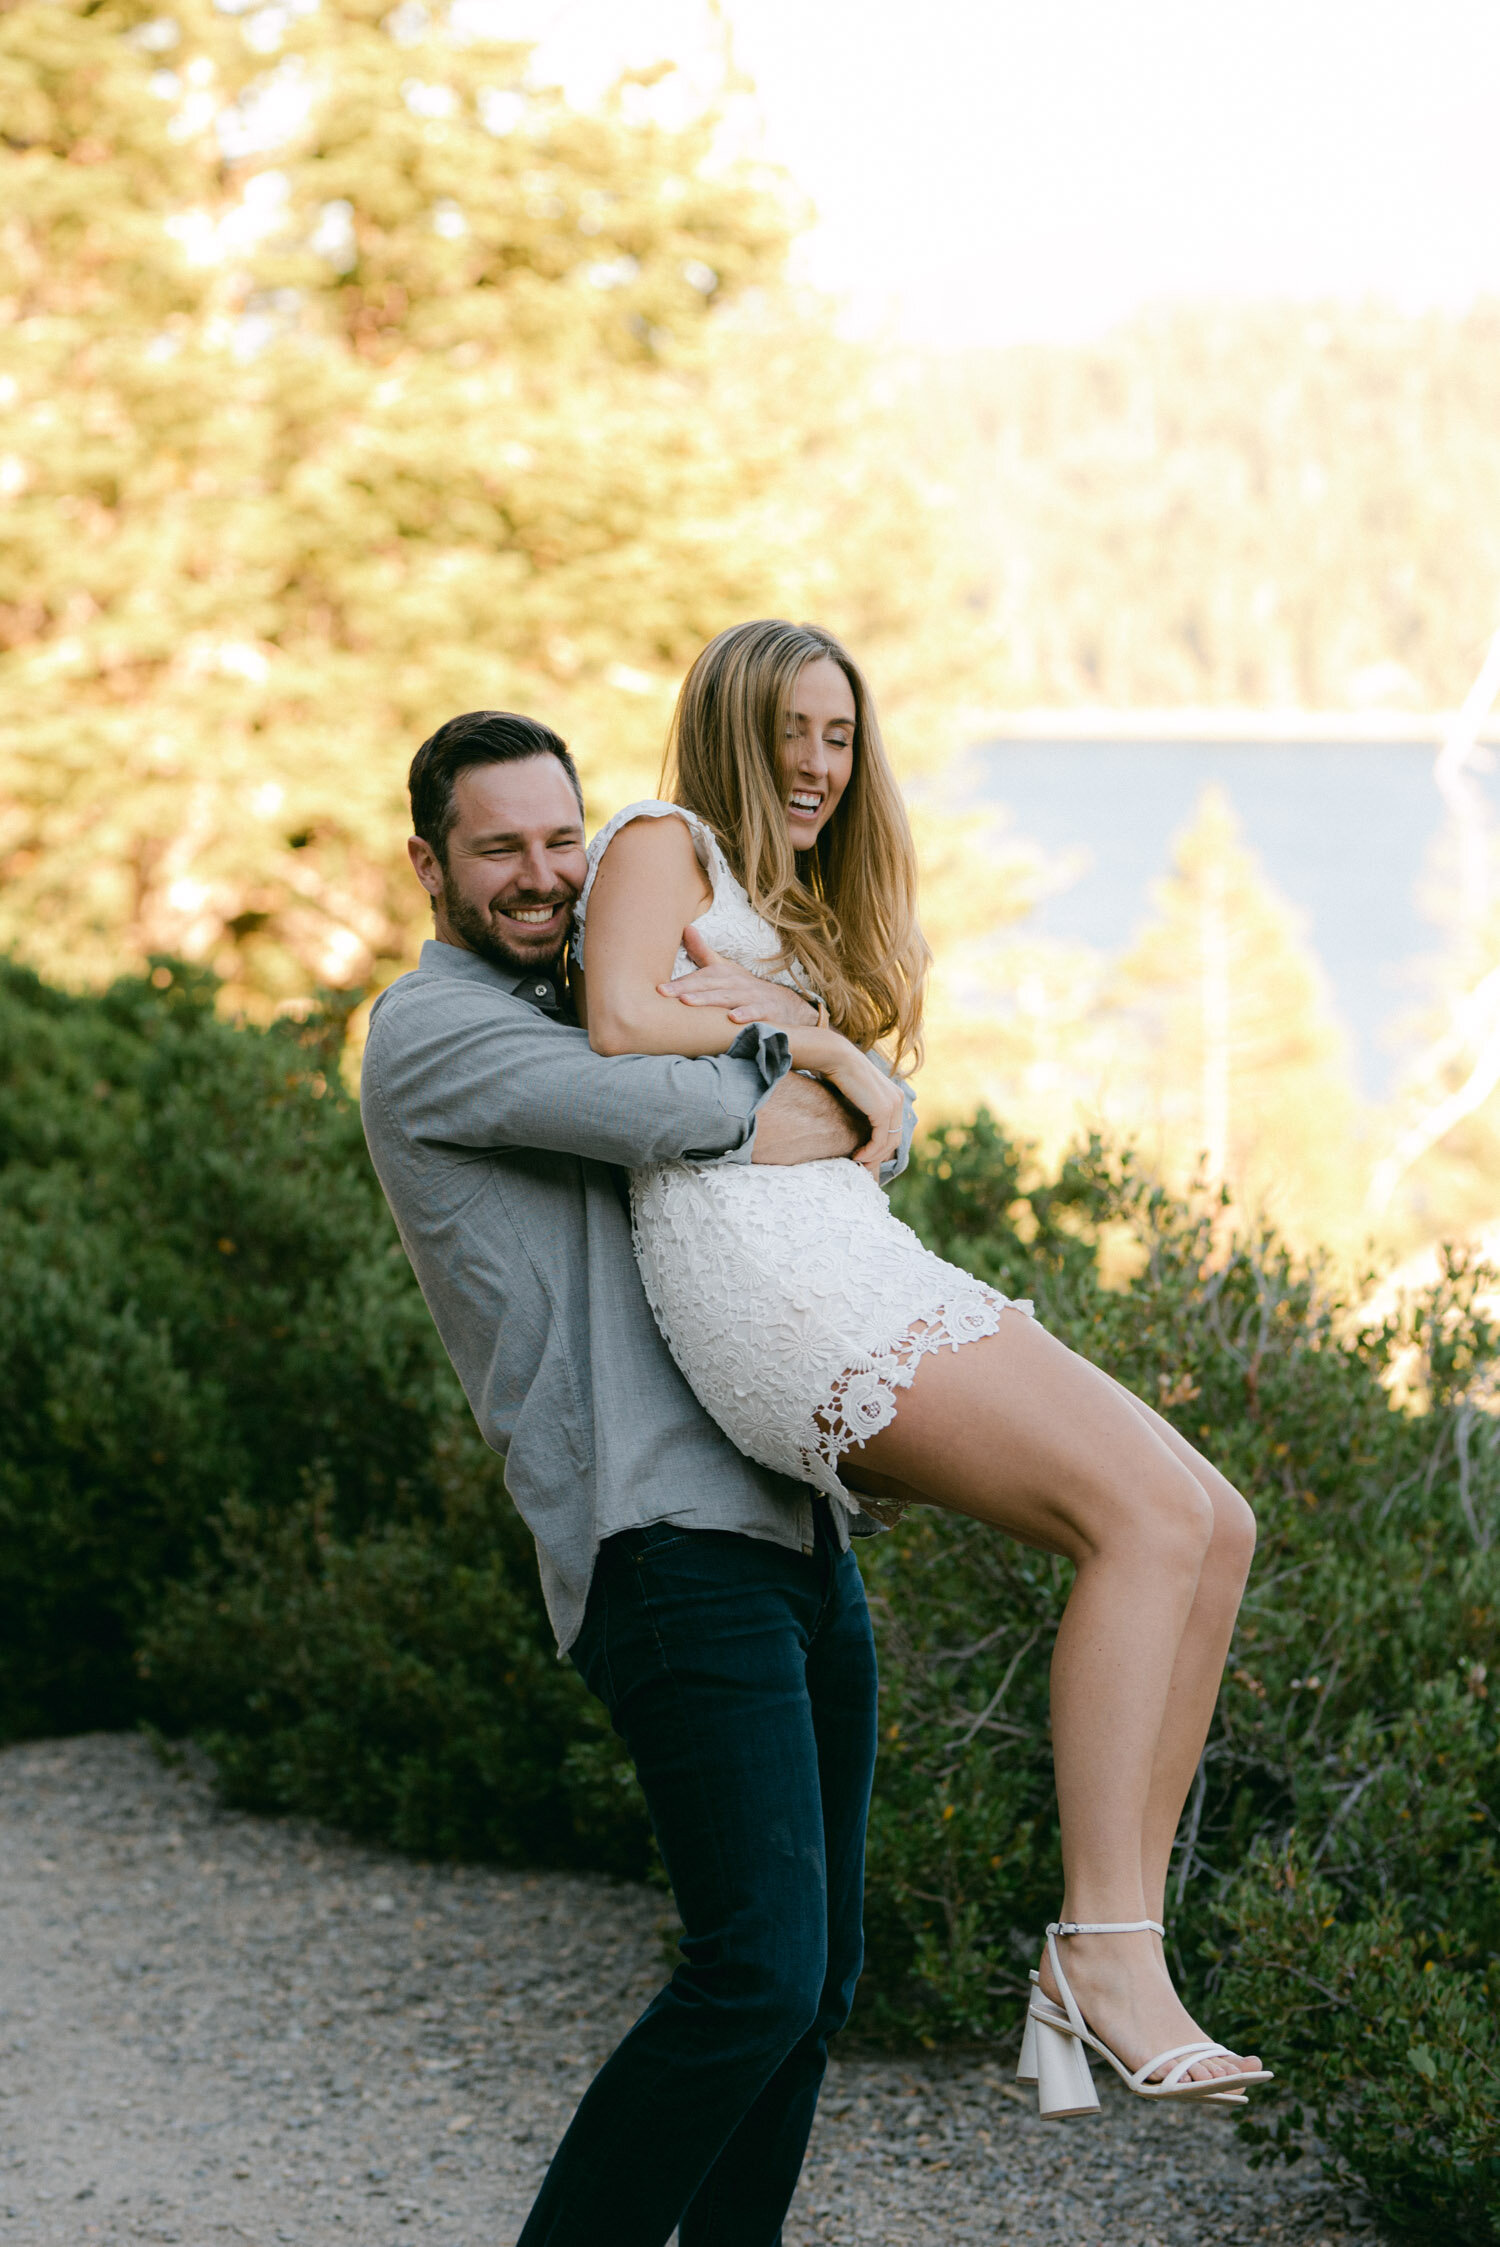 Emerald Bay engagement photoshoot, photo of a girl being bear hugged